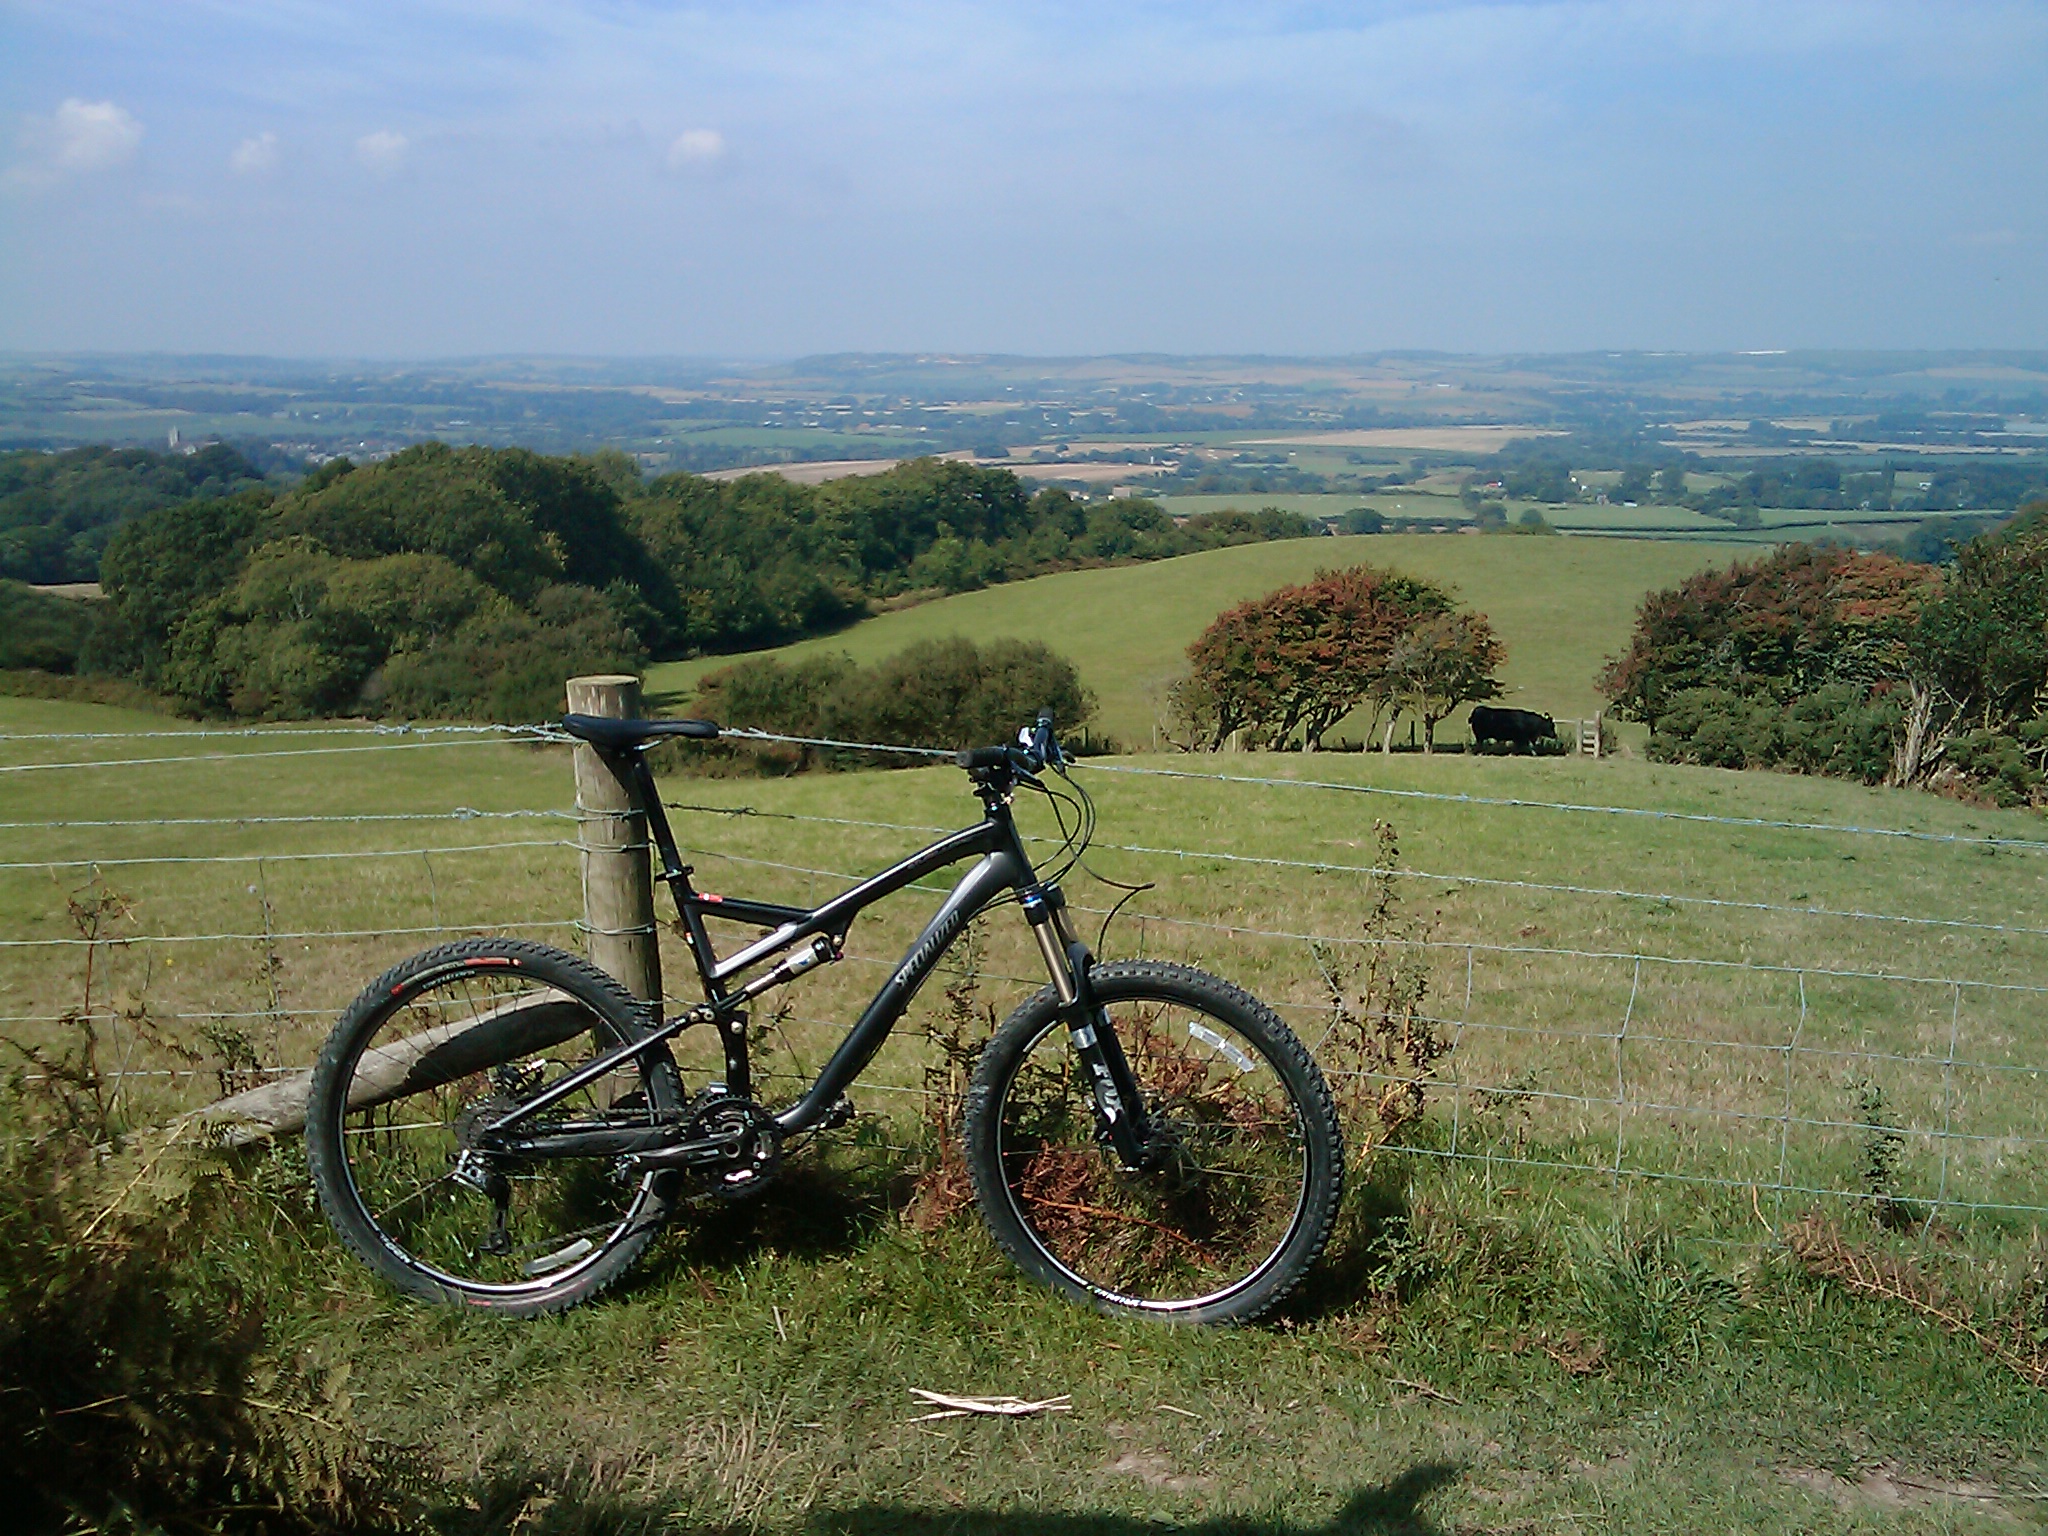 A smart-looking mountain bike, leant against a barbed-wire fence at the top of a hill, on a summer day.